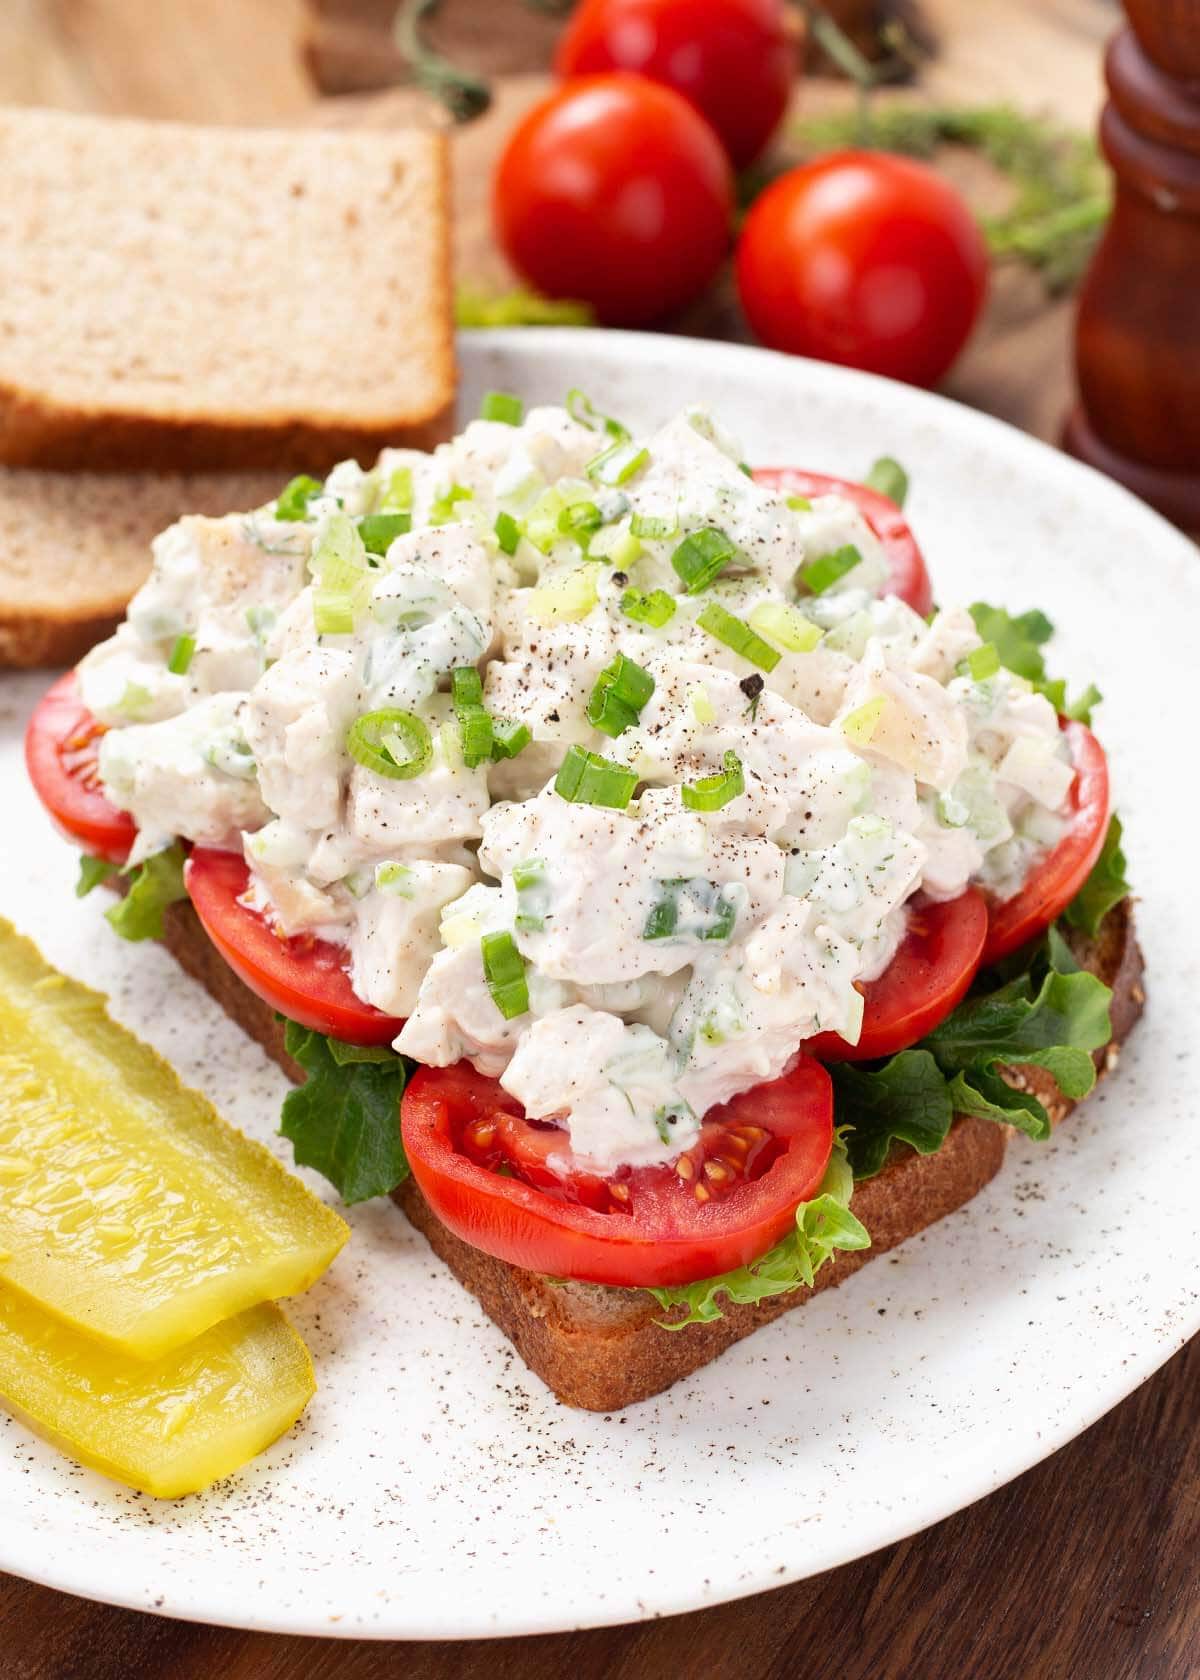 Easy Chicken Salad on bread with tomato slices.